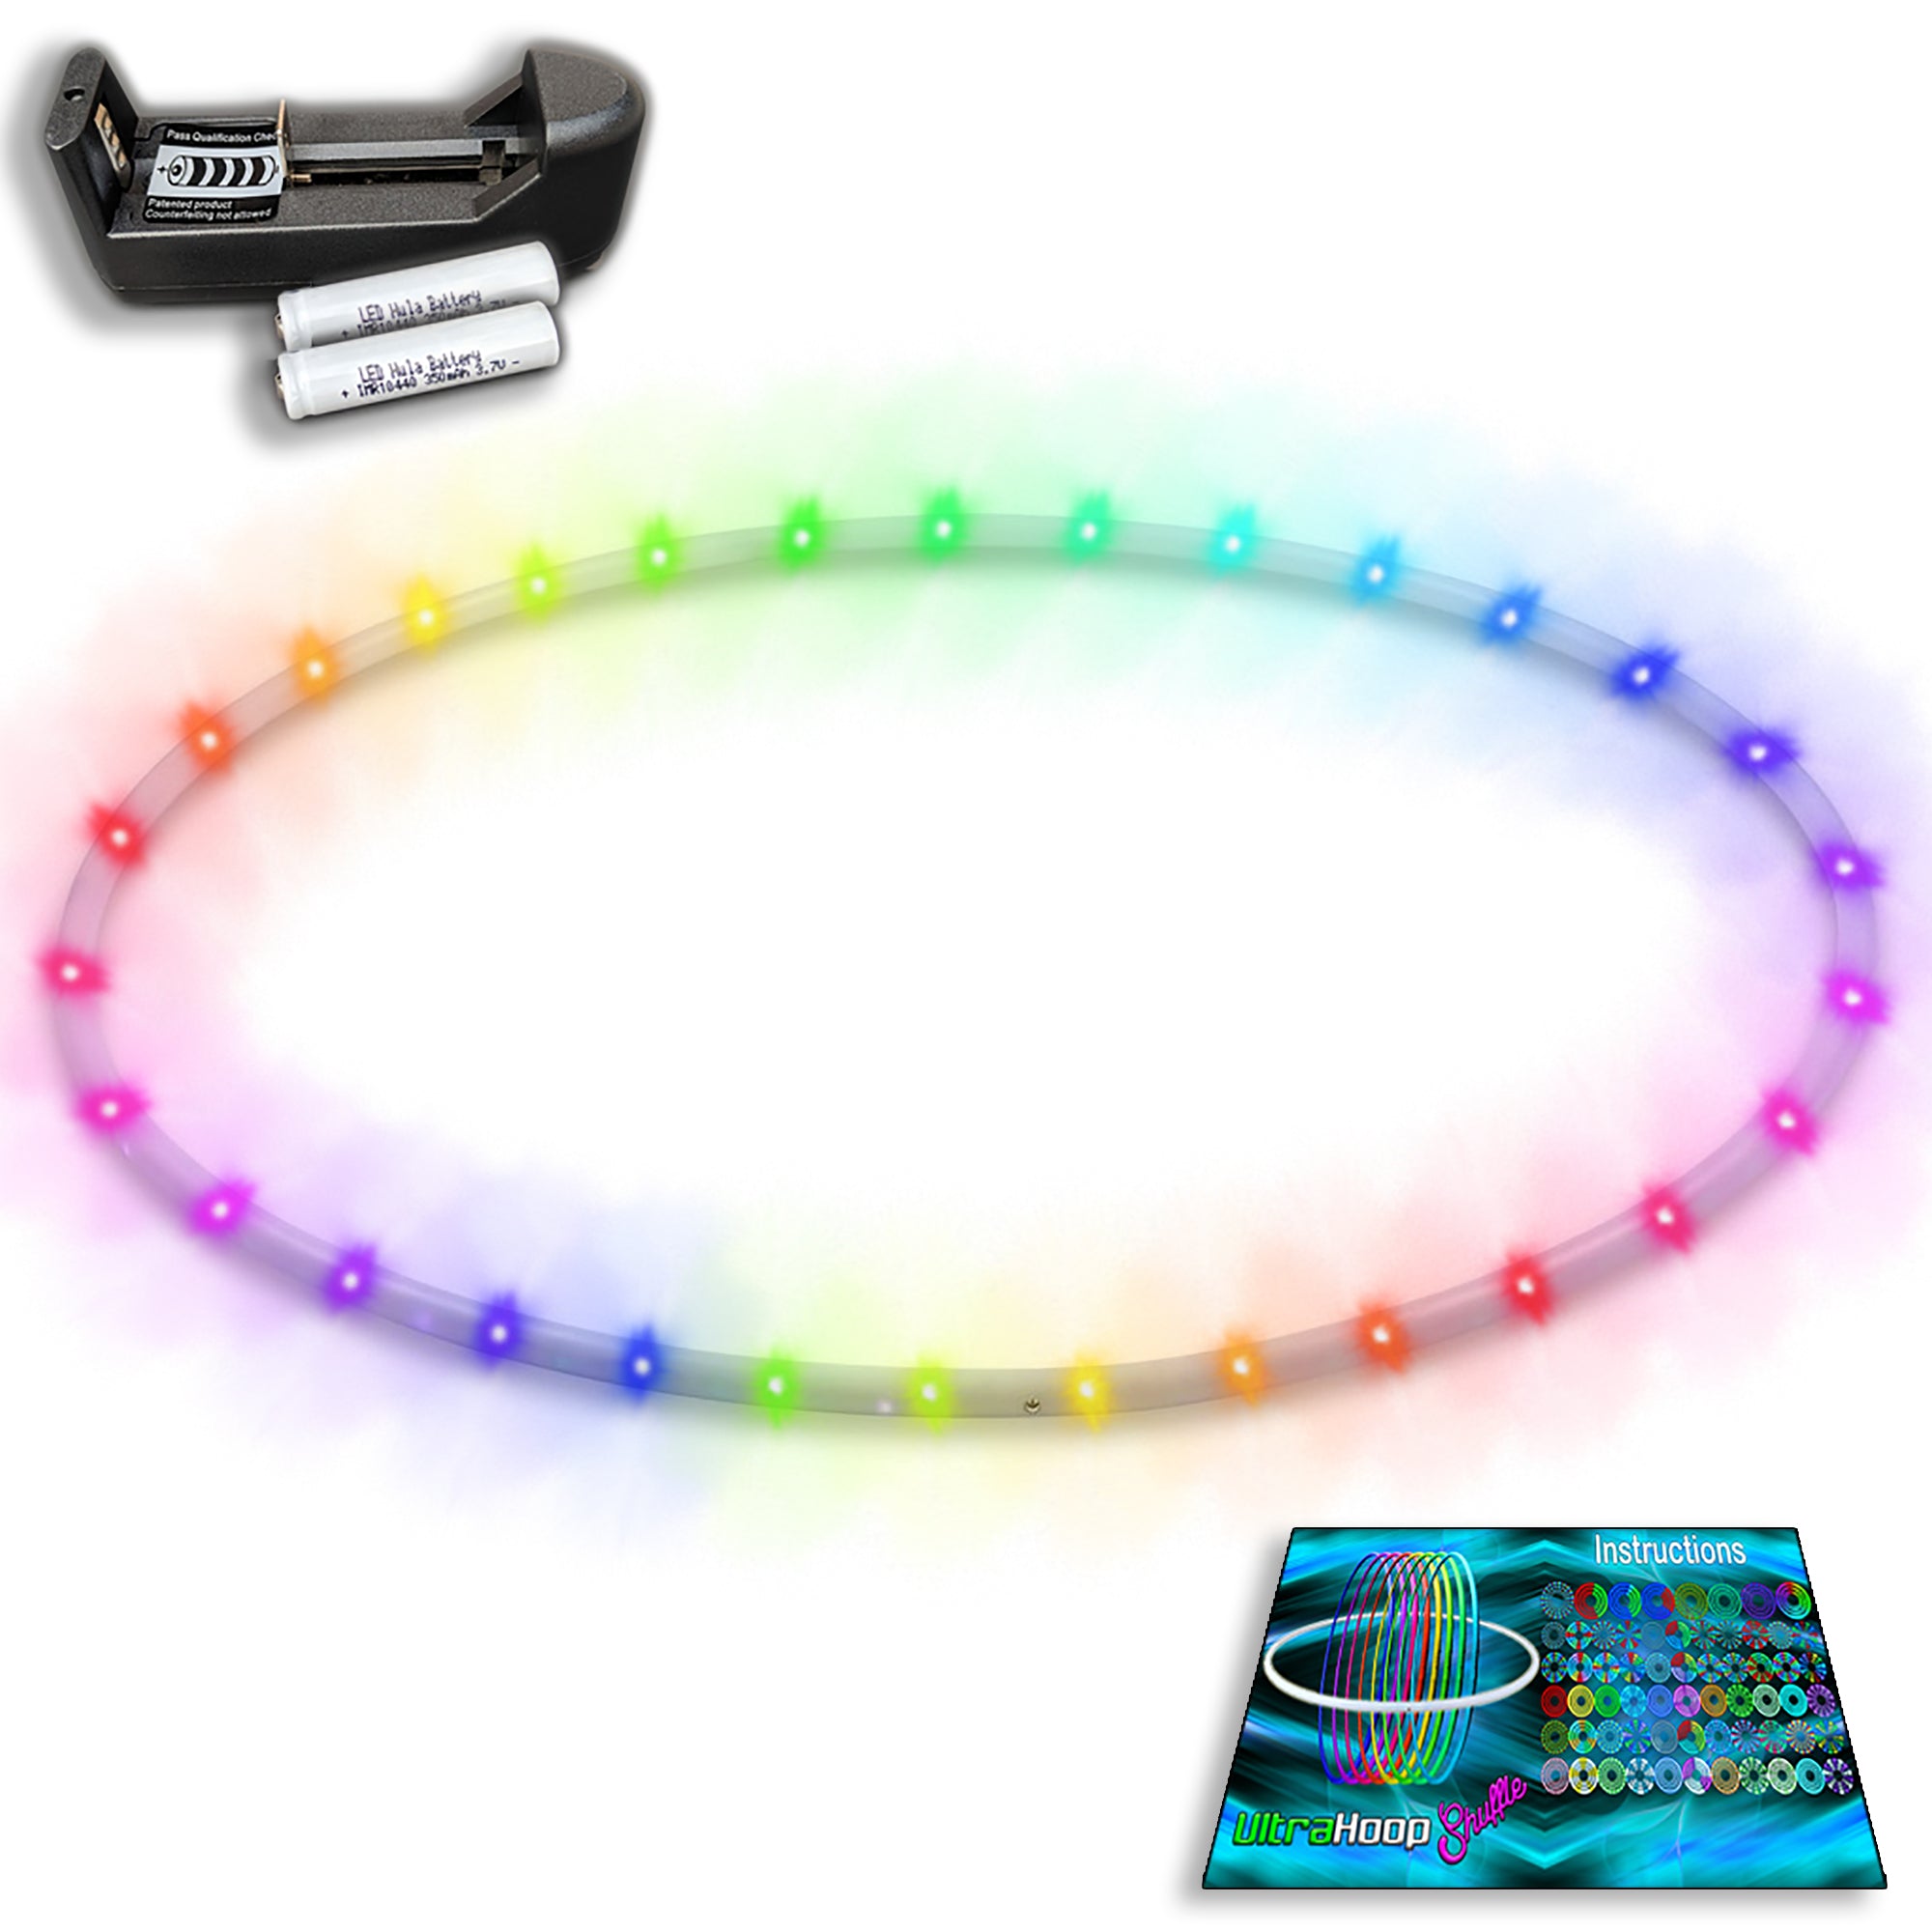 Buy Love and Light Dance & Exercise Hula Hoop COLLAPSIBLE Polypro